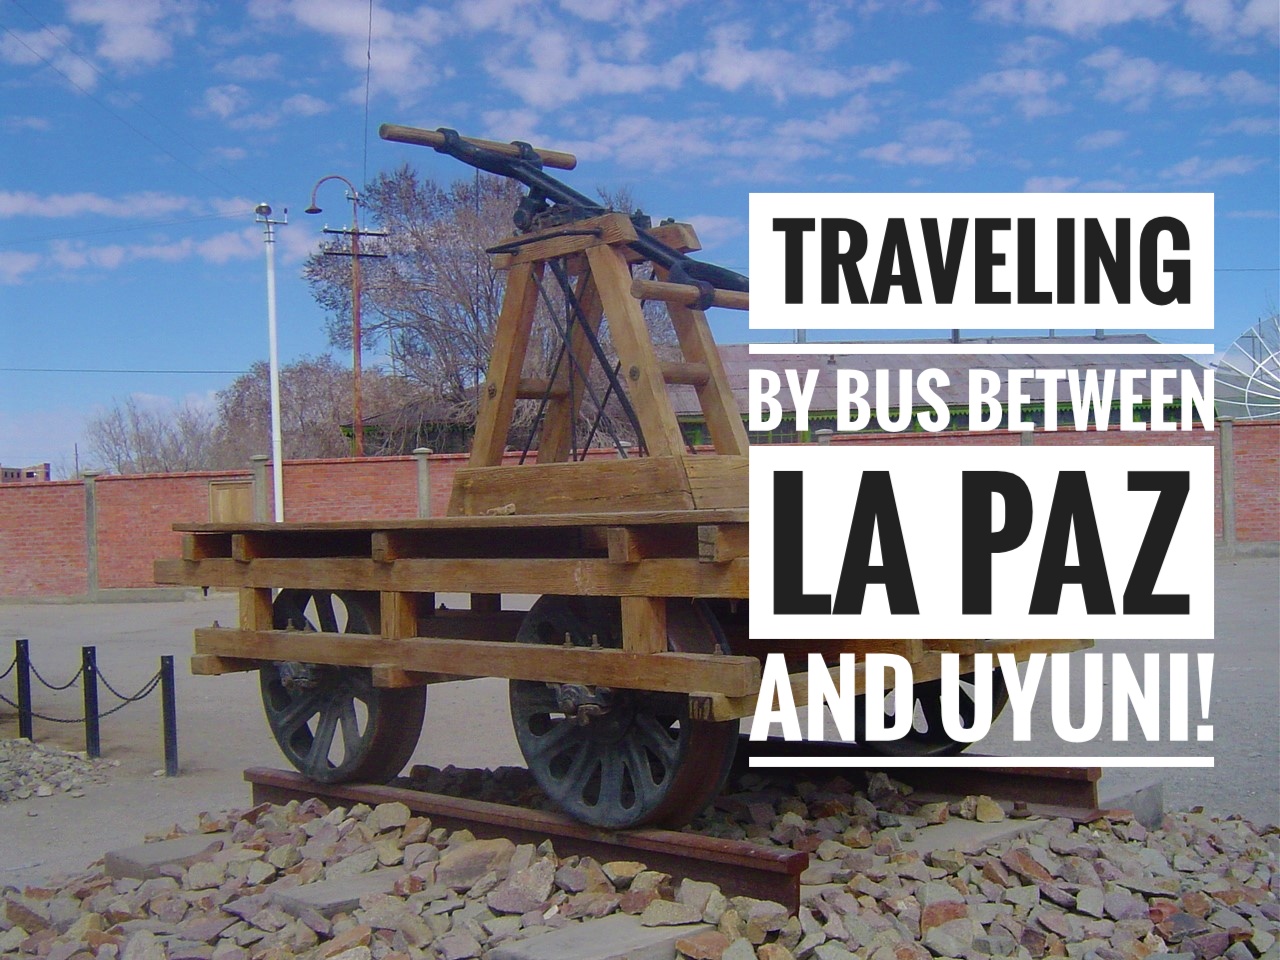 Find out why traveling by bus between La Paz and Uyuni in Bolivia was my worst bus experience in South America! It’s actually one of the Treasures Of Traveling I will always remember! Bolivia & South America are filled with many Treasures Of Traveling